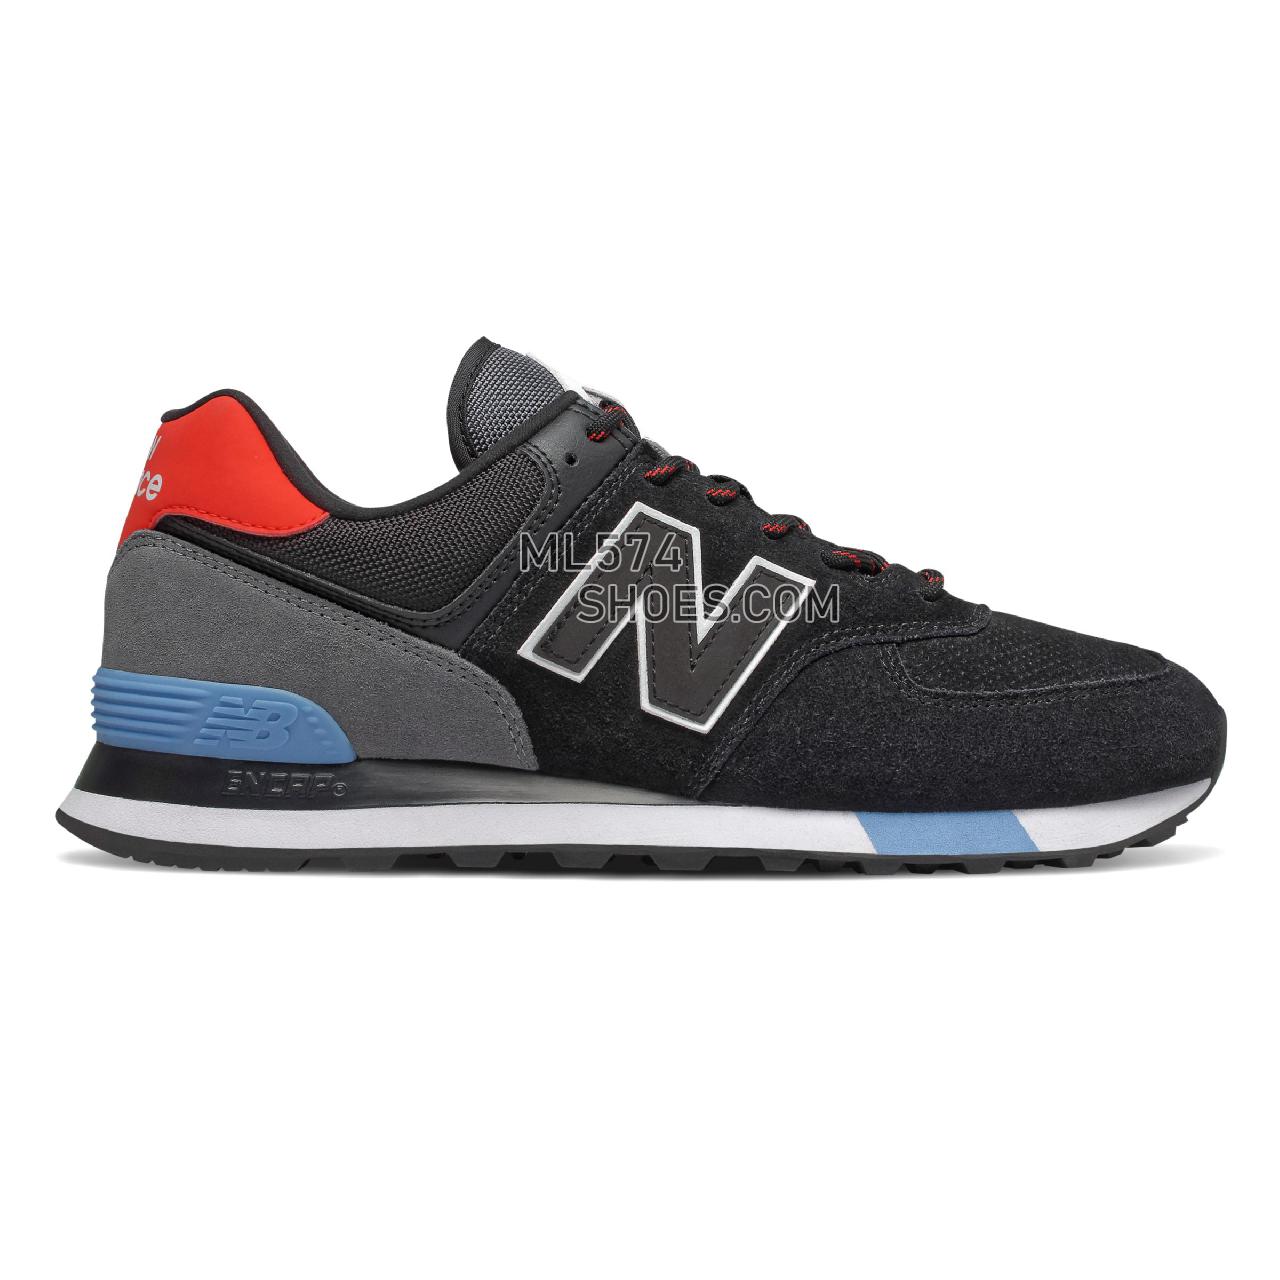 New Balance 574 - Men's Classic Sneakers - Black with Velocity Red - ML574JHO